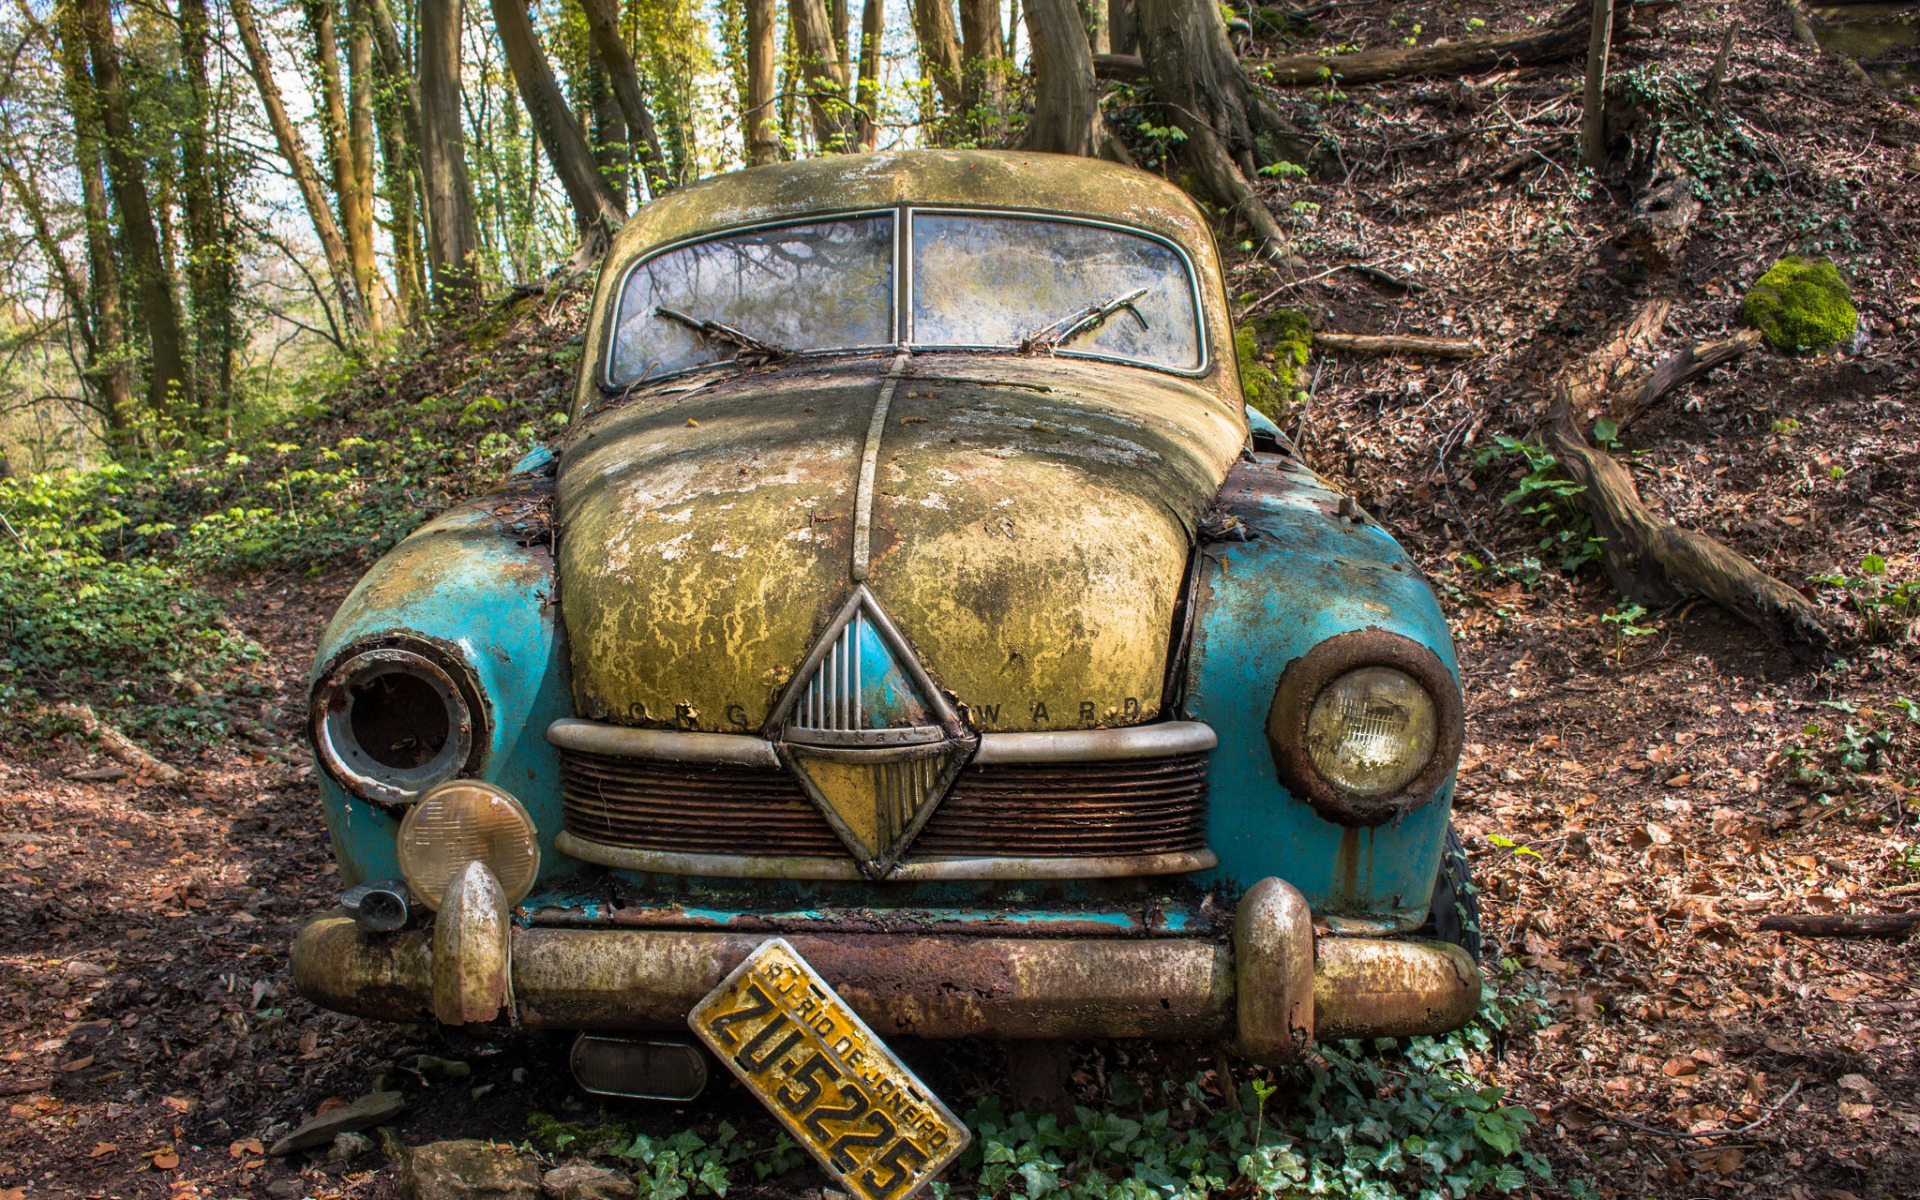 Download wallpaper rusty car, dump, abandoned car, Brazil, forest, retro cars for desktop with resolution 1920x1200. High Quality HD picture wallpaper